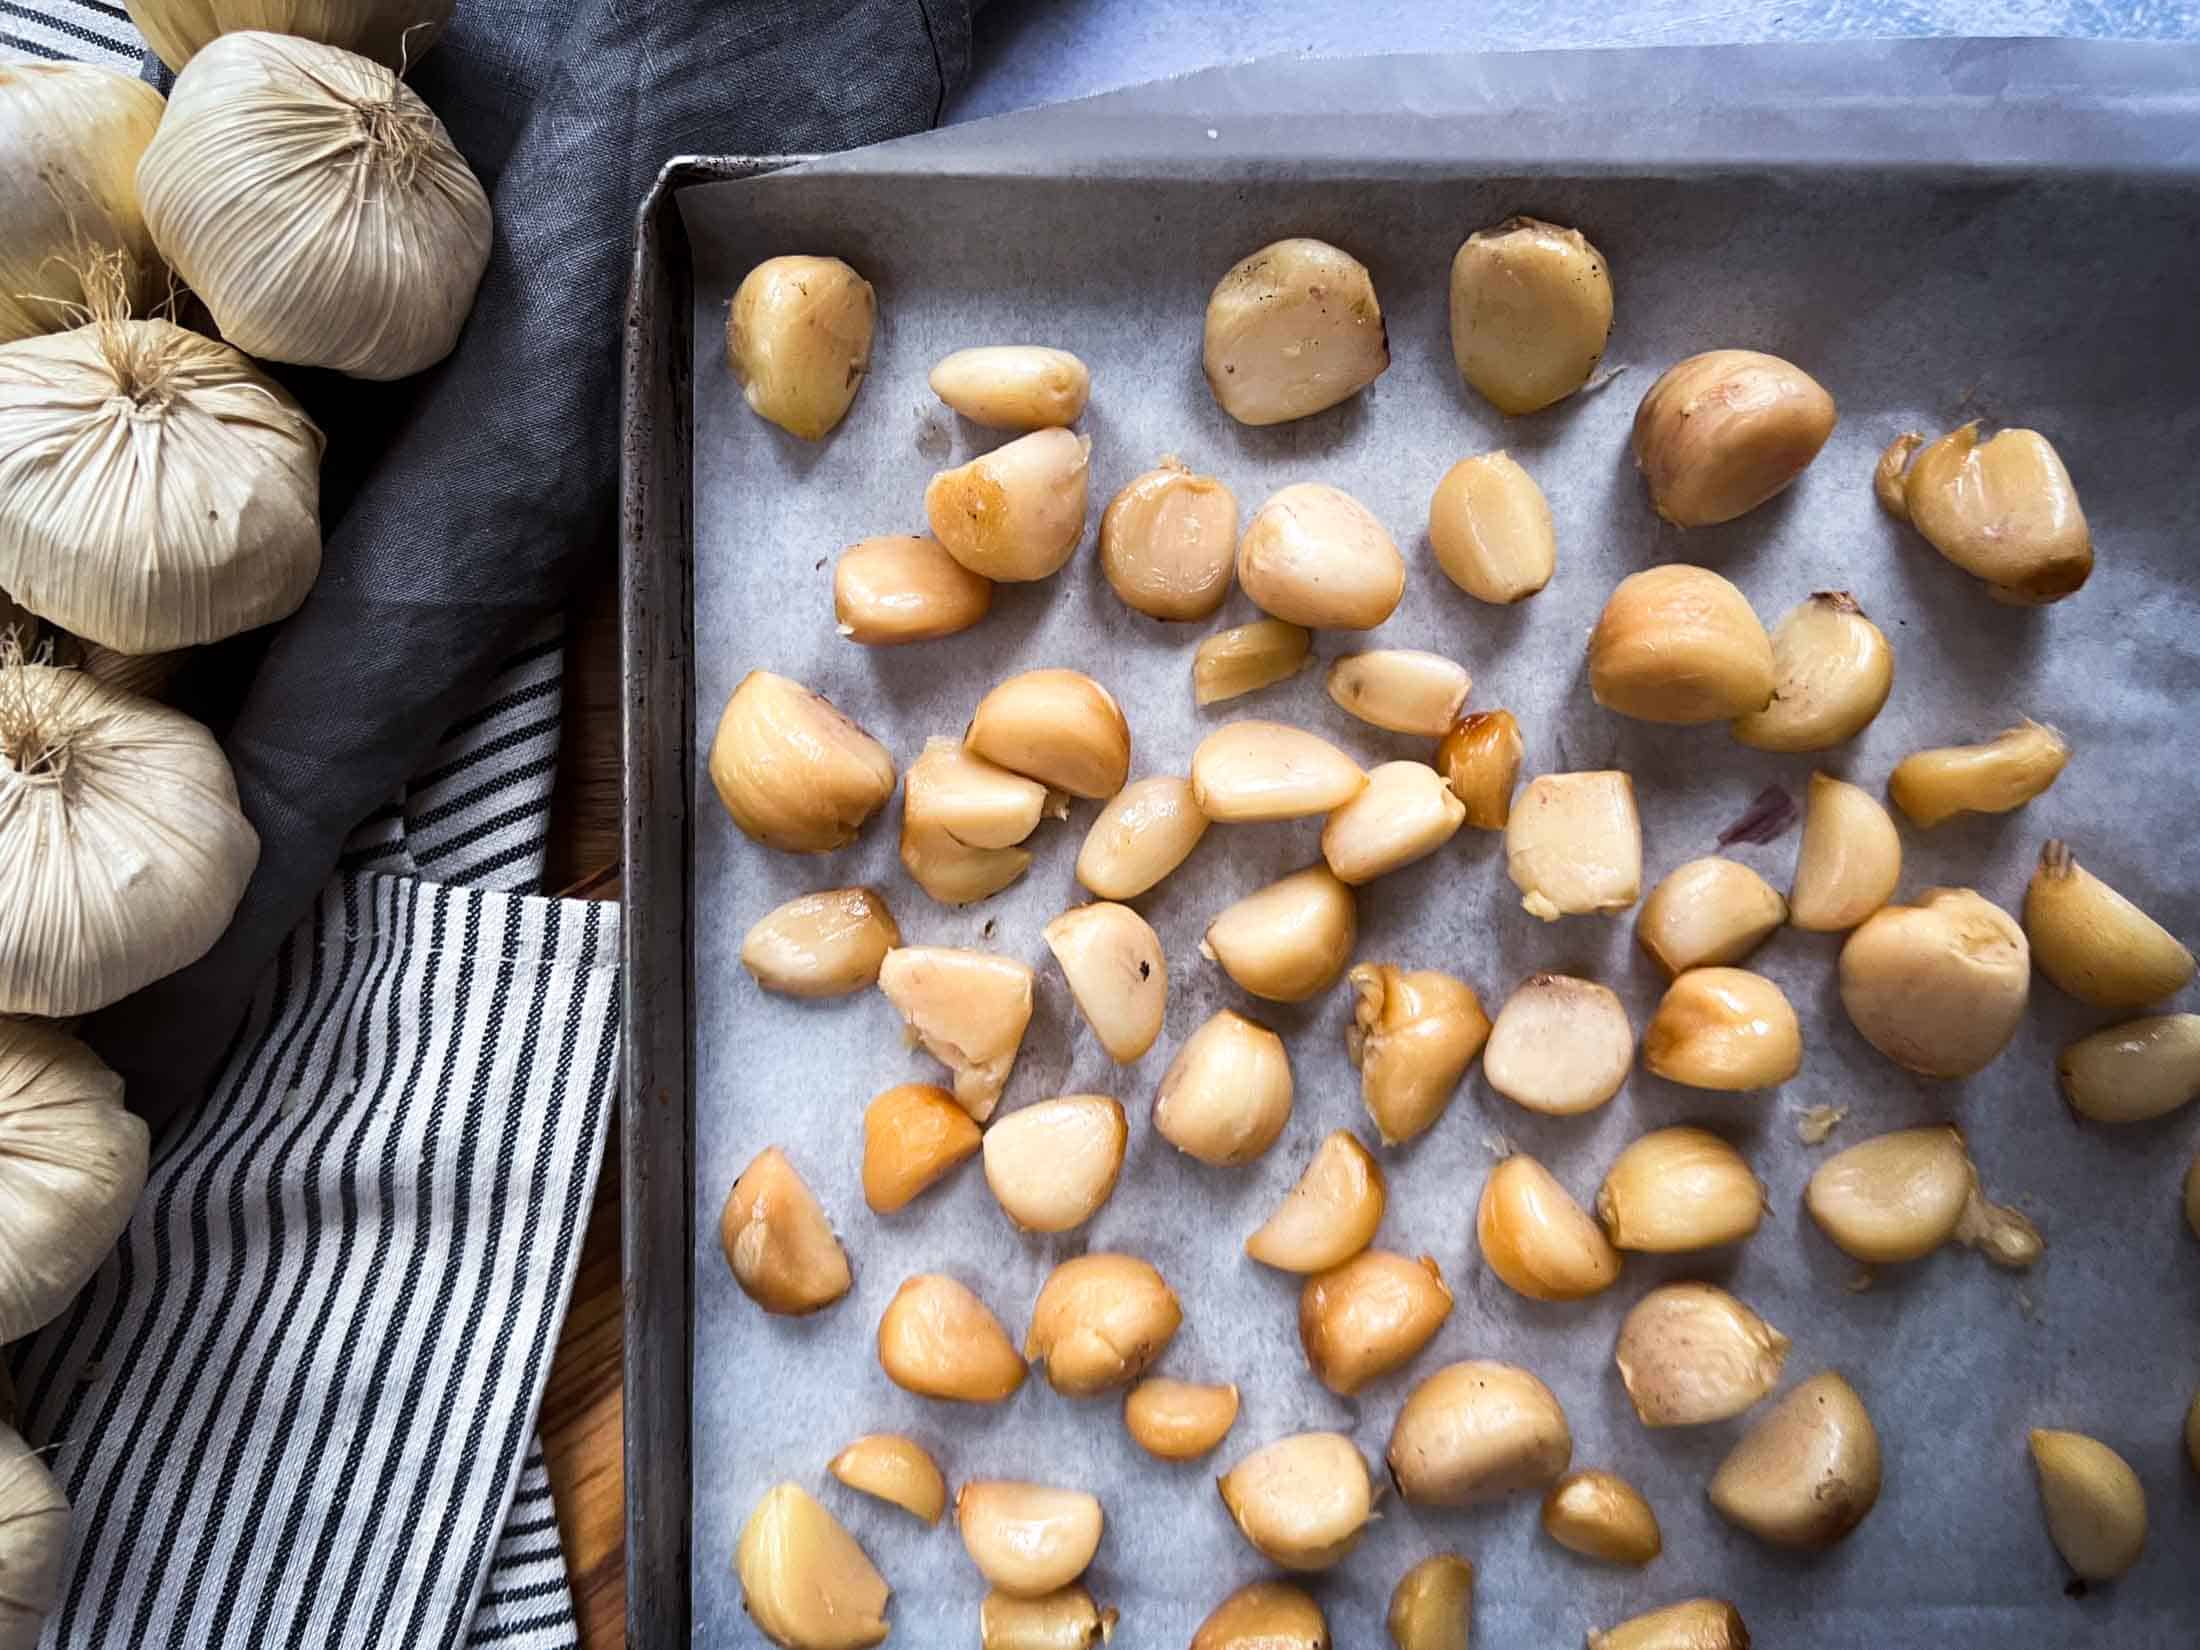 Peeled, smoked garlic cloves on a parchment lined baking sheet.